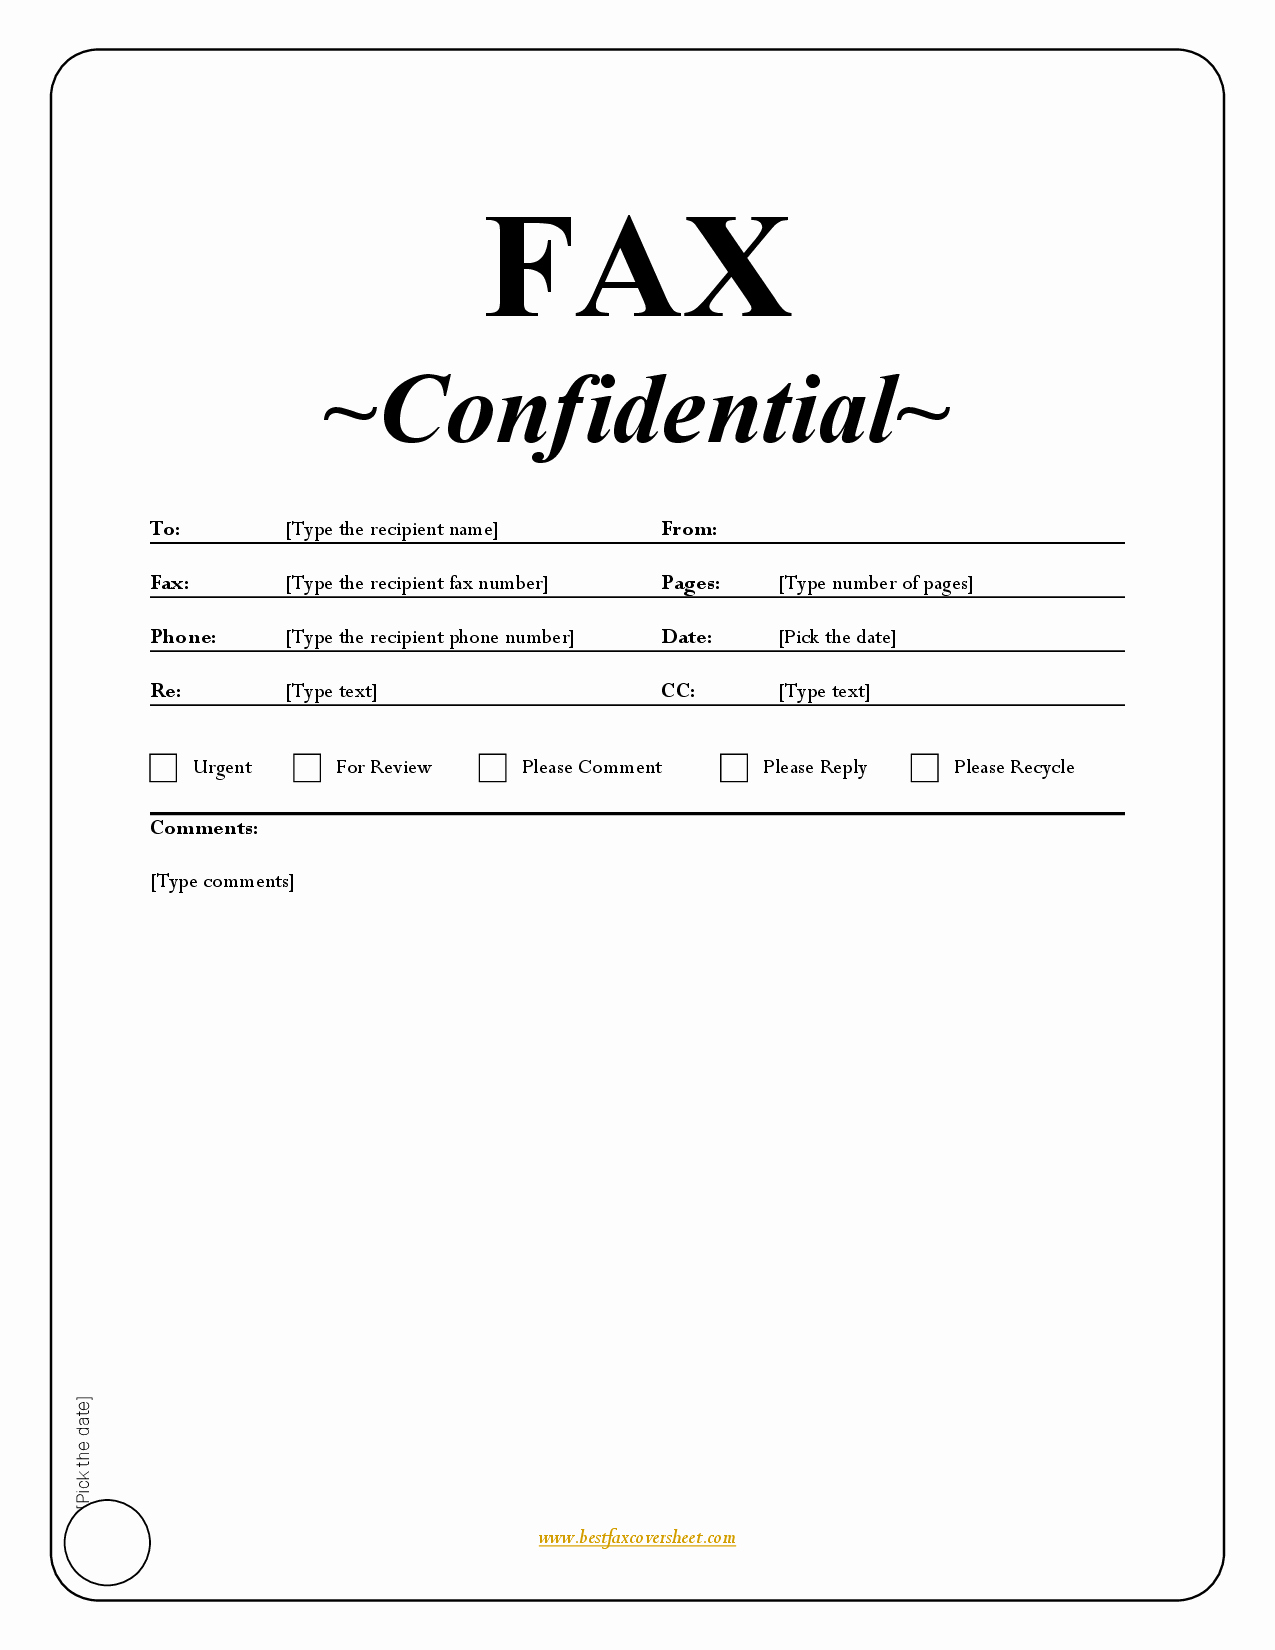 Samples Of Fax Cover Sheet Best Of Fax Sample Cover Sheet Template Printable Page